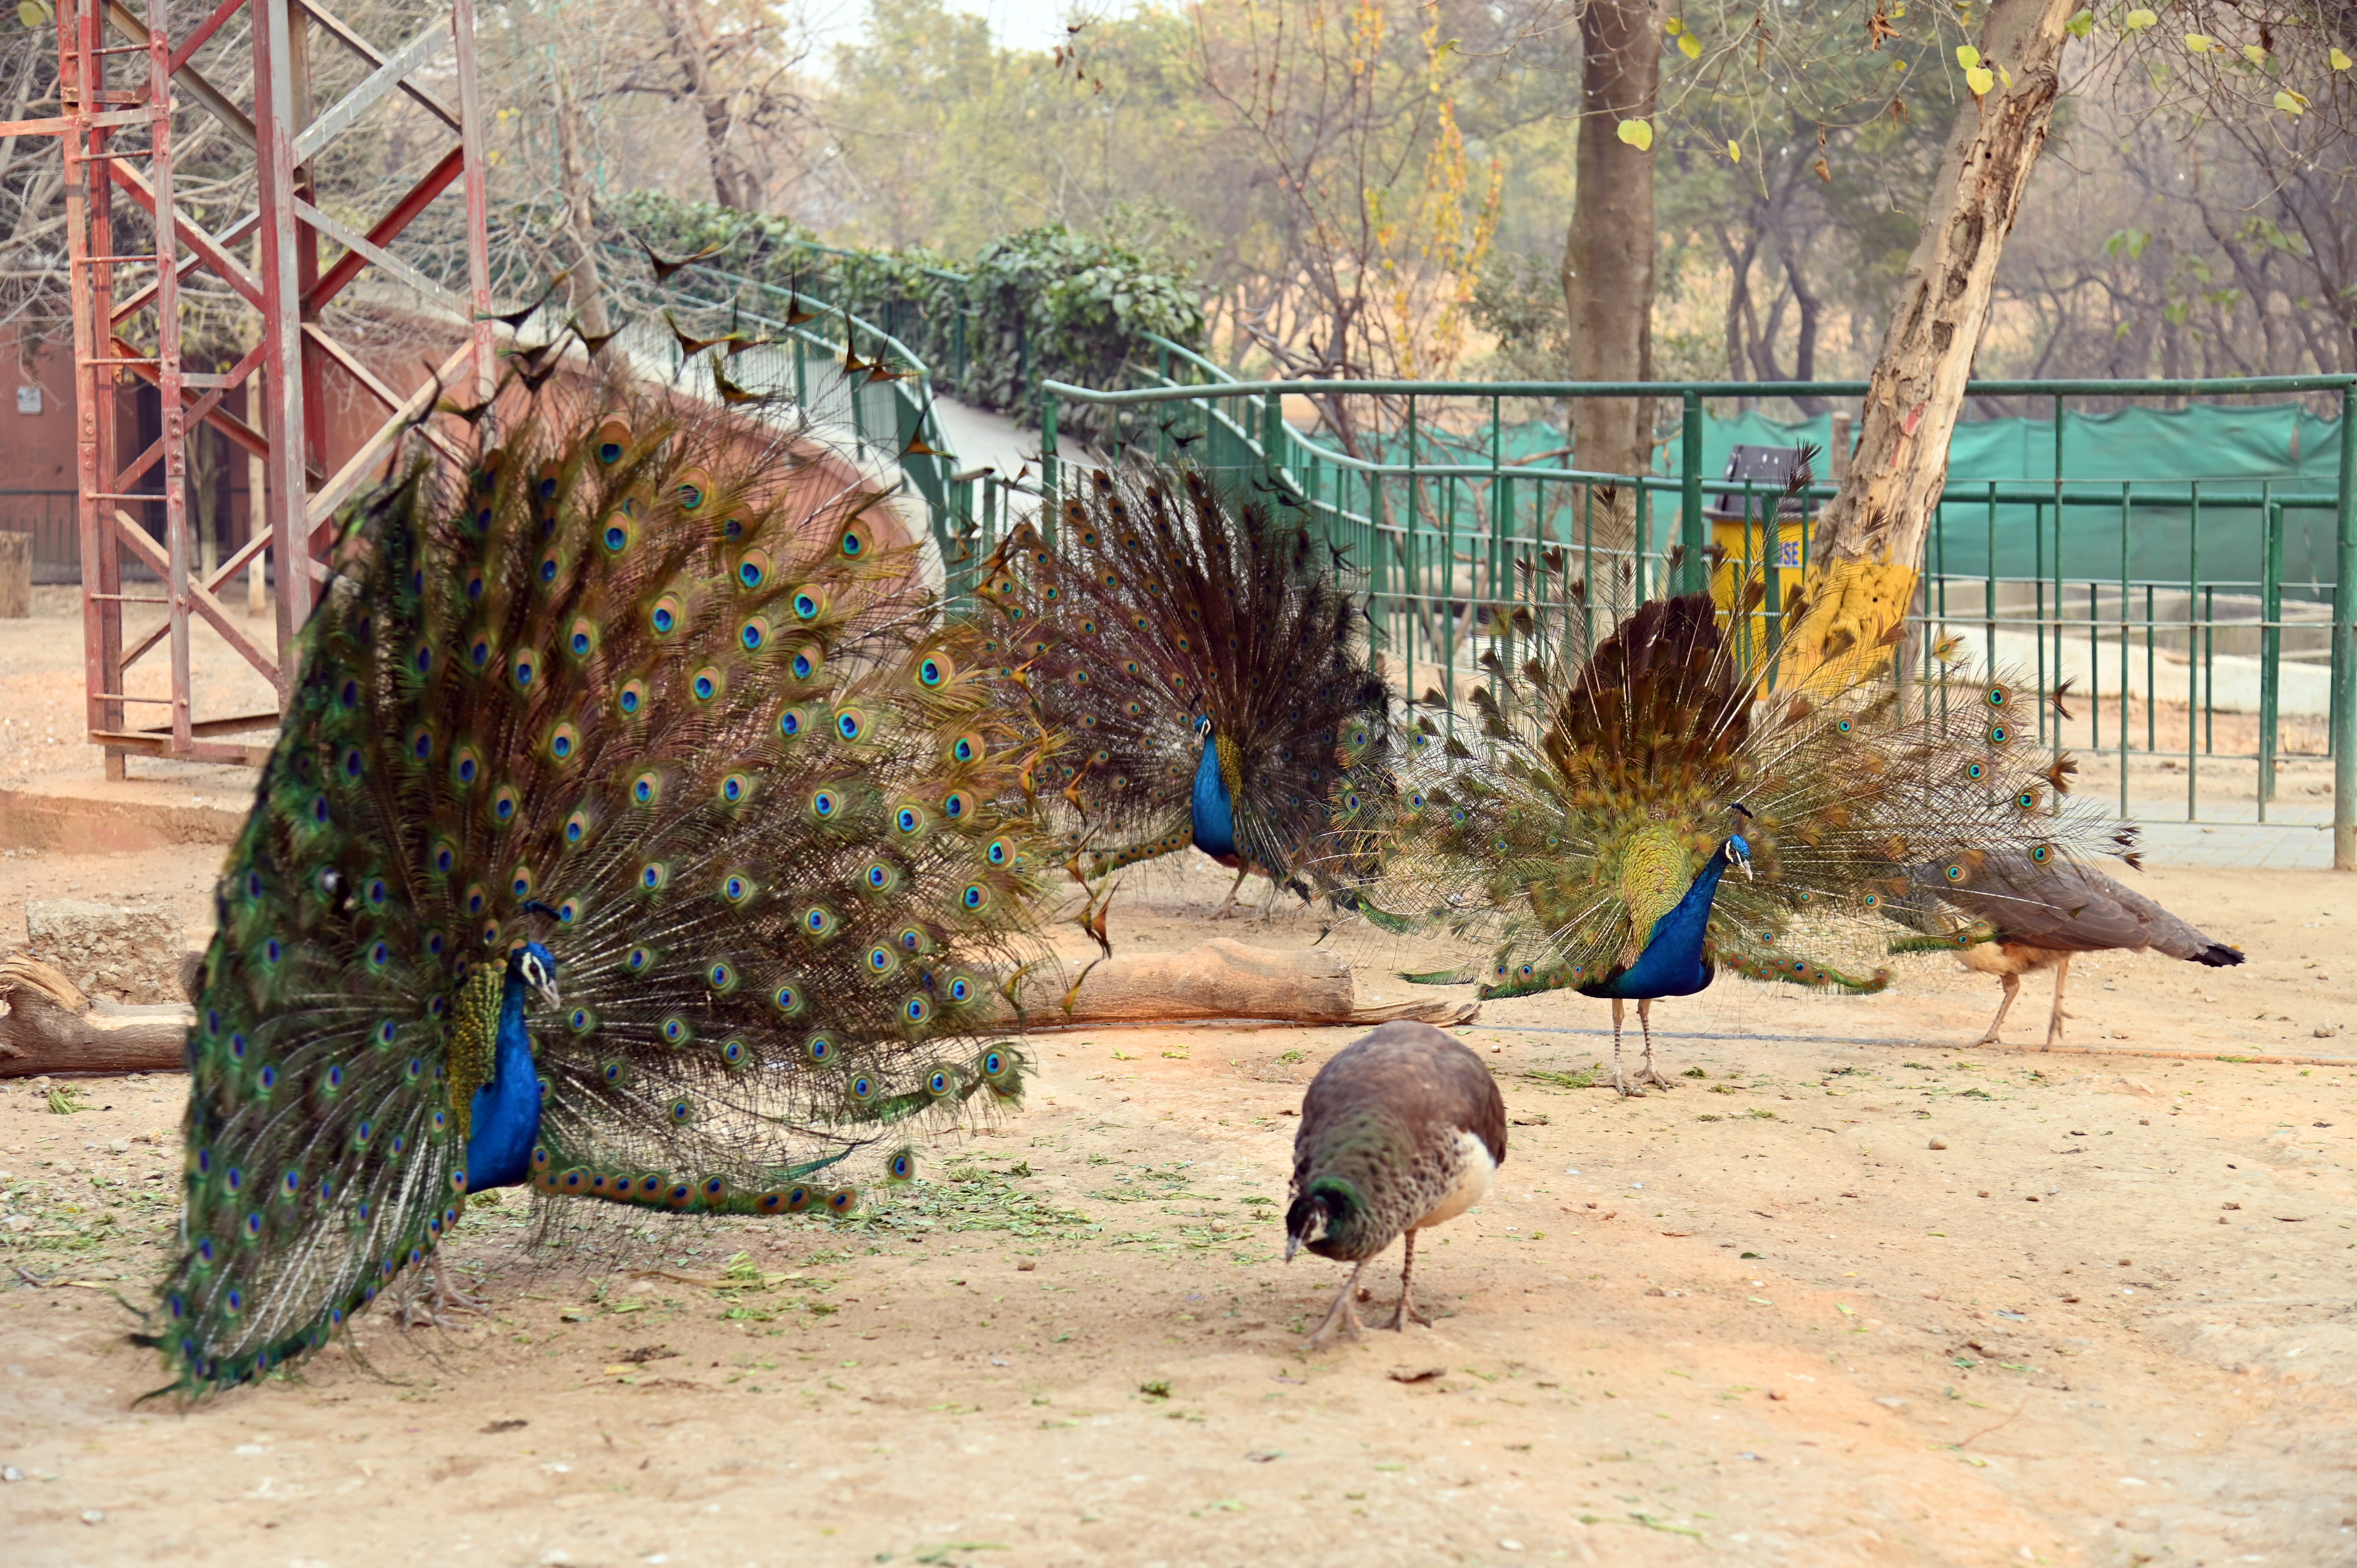 The peafowl with beautiful and colorful open feathers